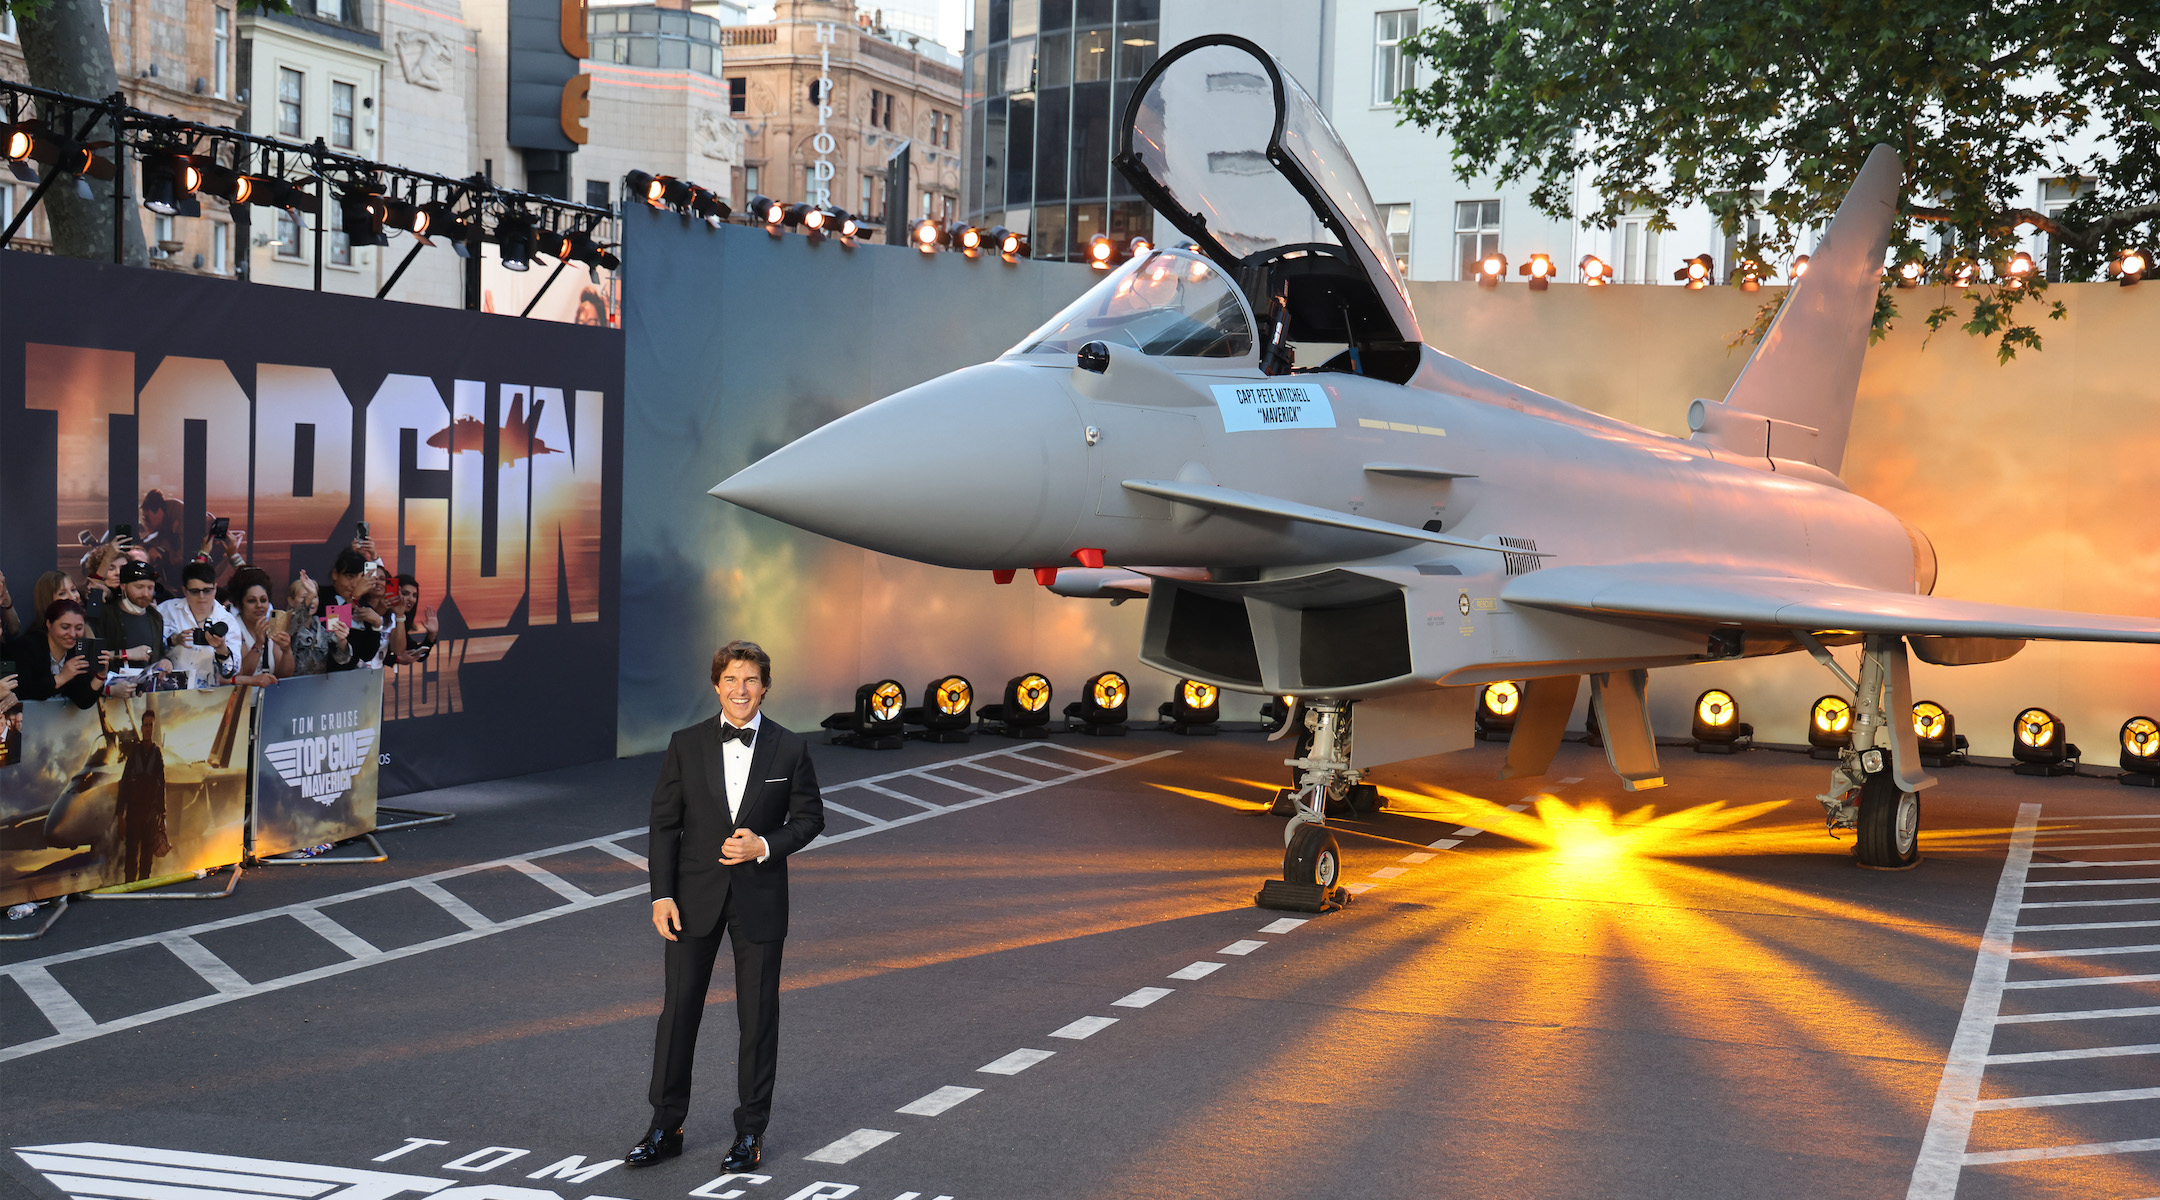 Tom Cruise at a “Top Gun: Maverick” premier at Leicester Square in London, May 19, 2022. (Neil Mockford/FilmMagic via Getty Images)